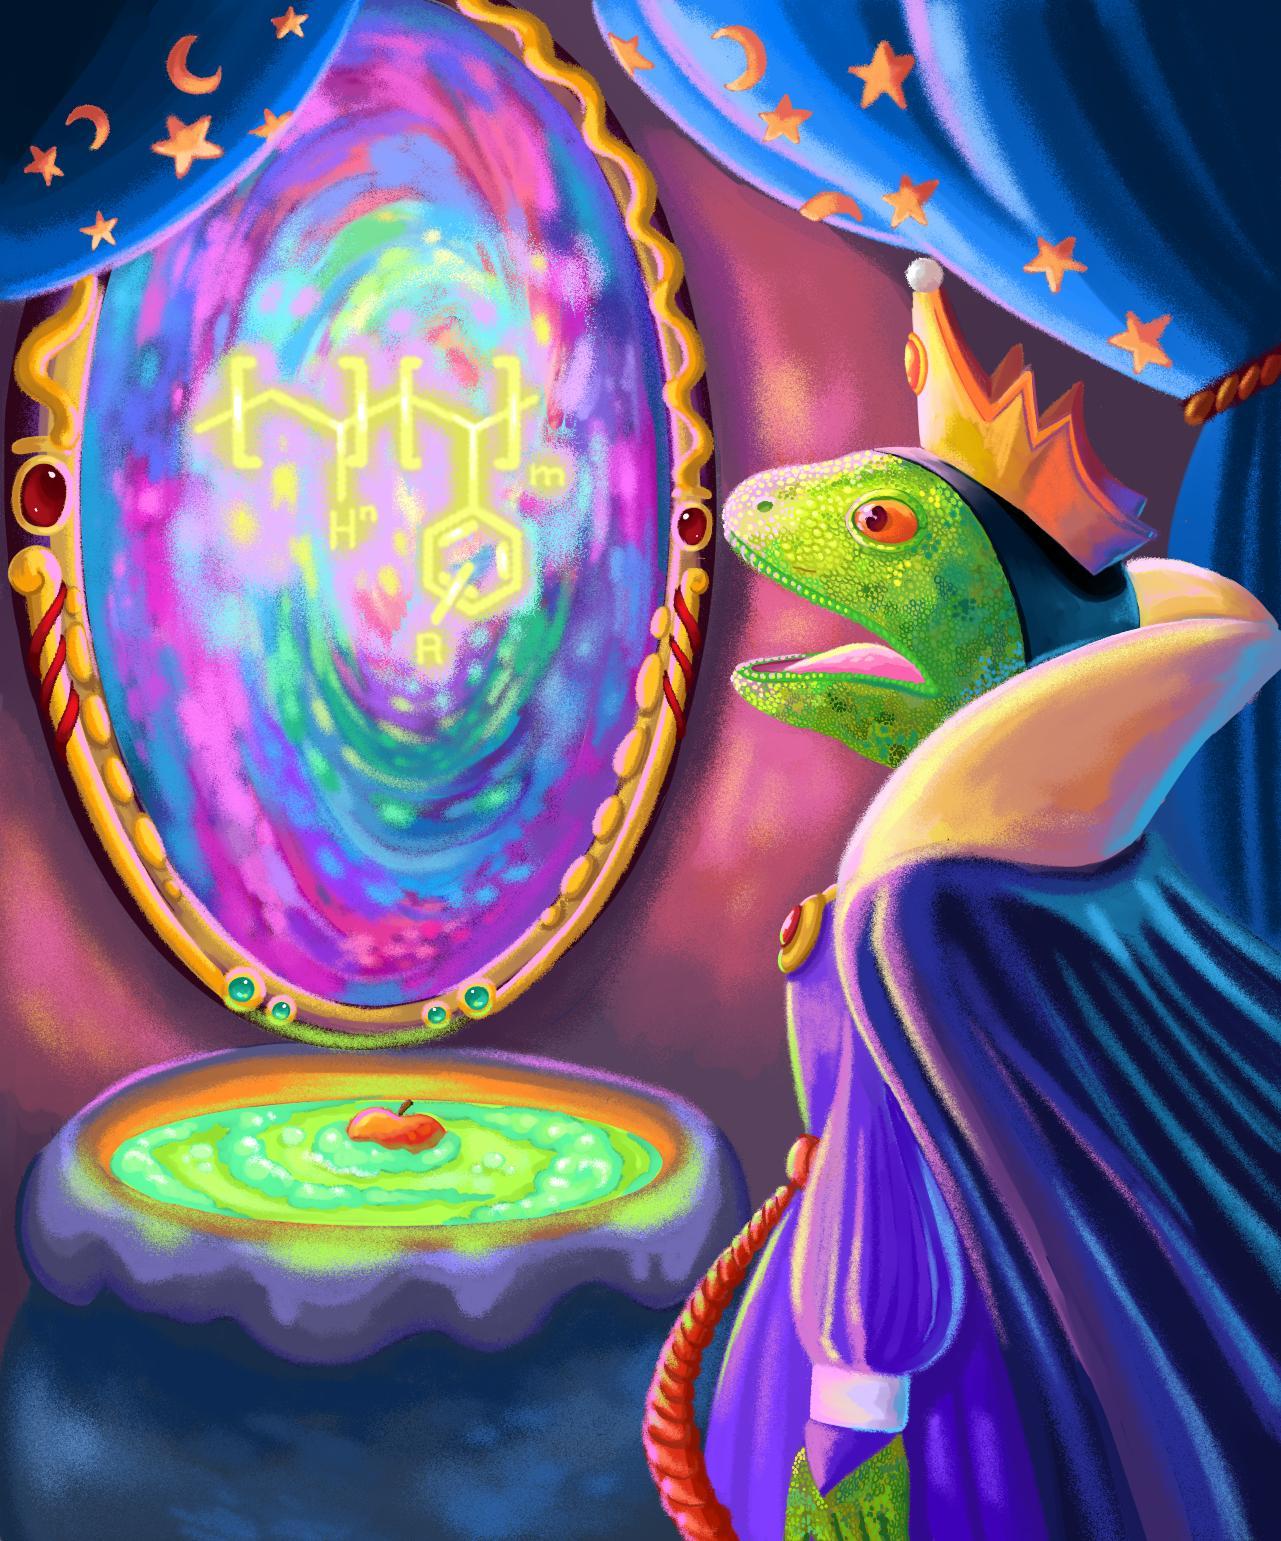 illustration of lizard, wearing a crown and gown, gaping at the sight of a molecular model depicted on a magic mirror behind a bubbly cauldron